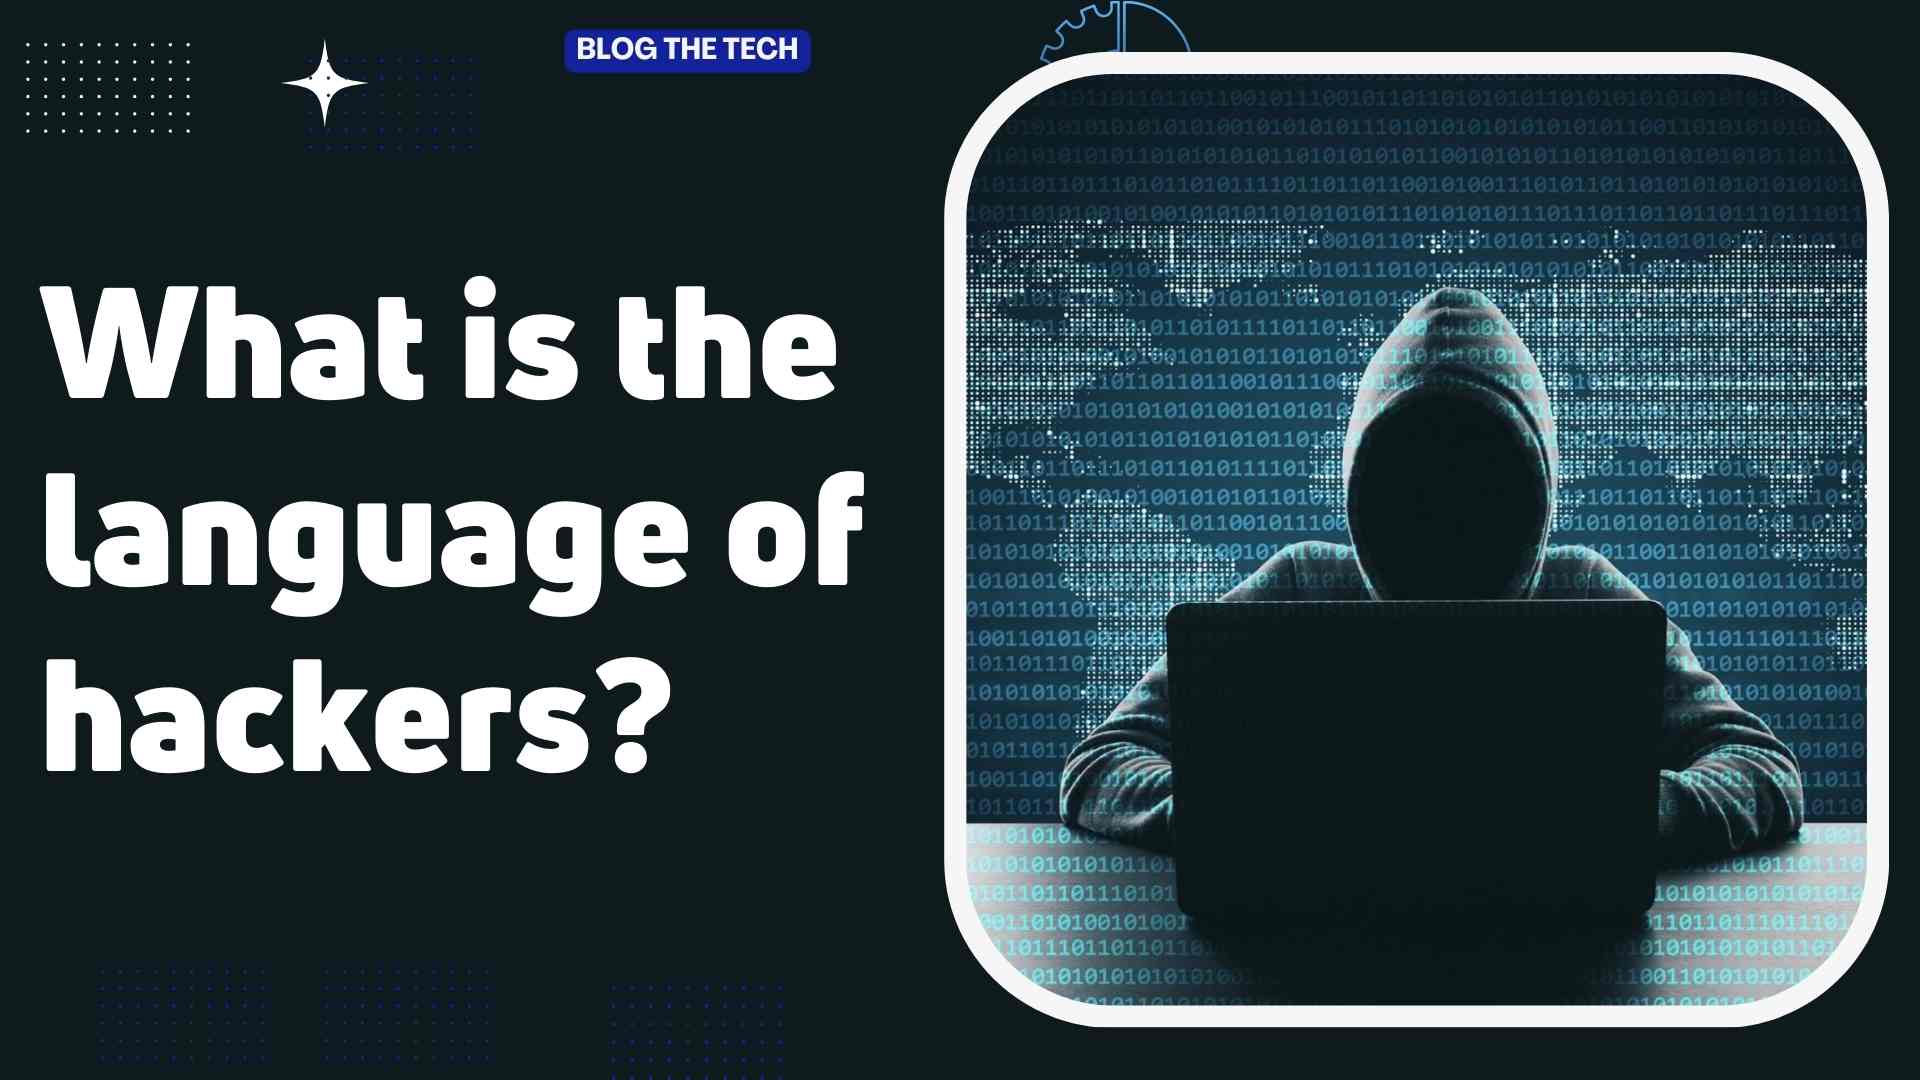 What is the language of hackers?